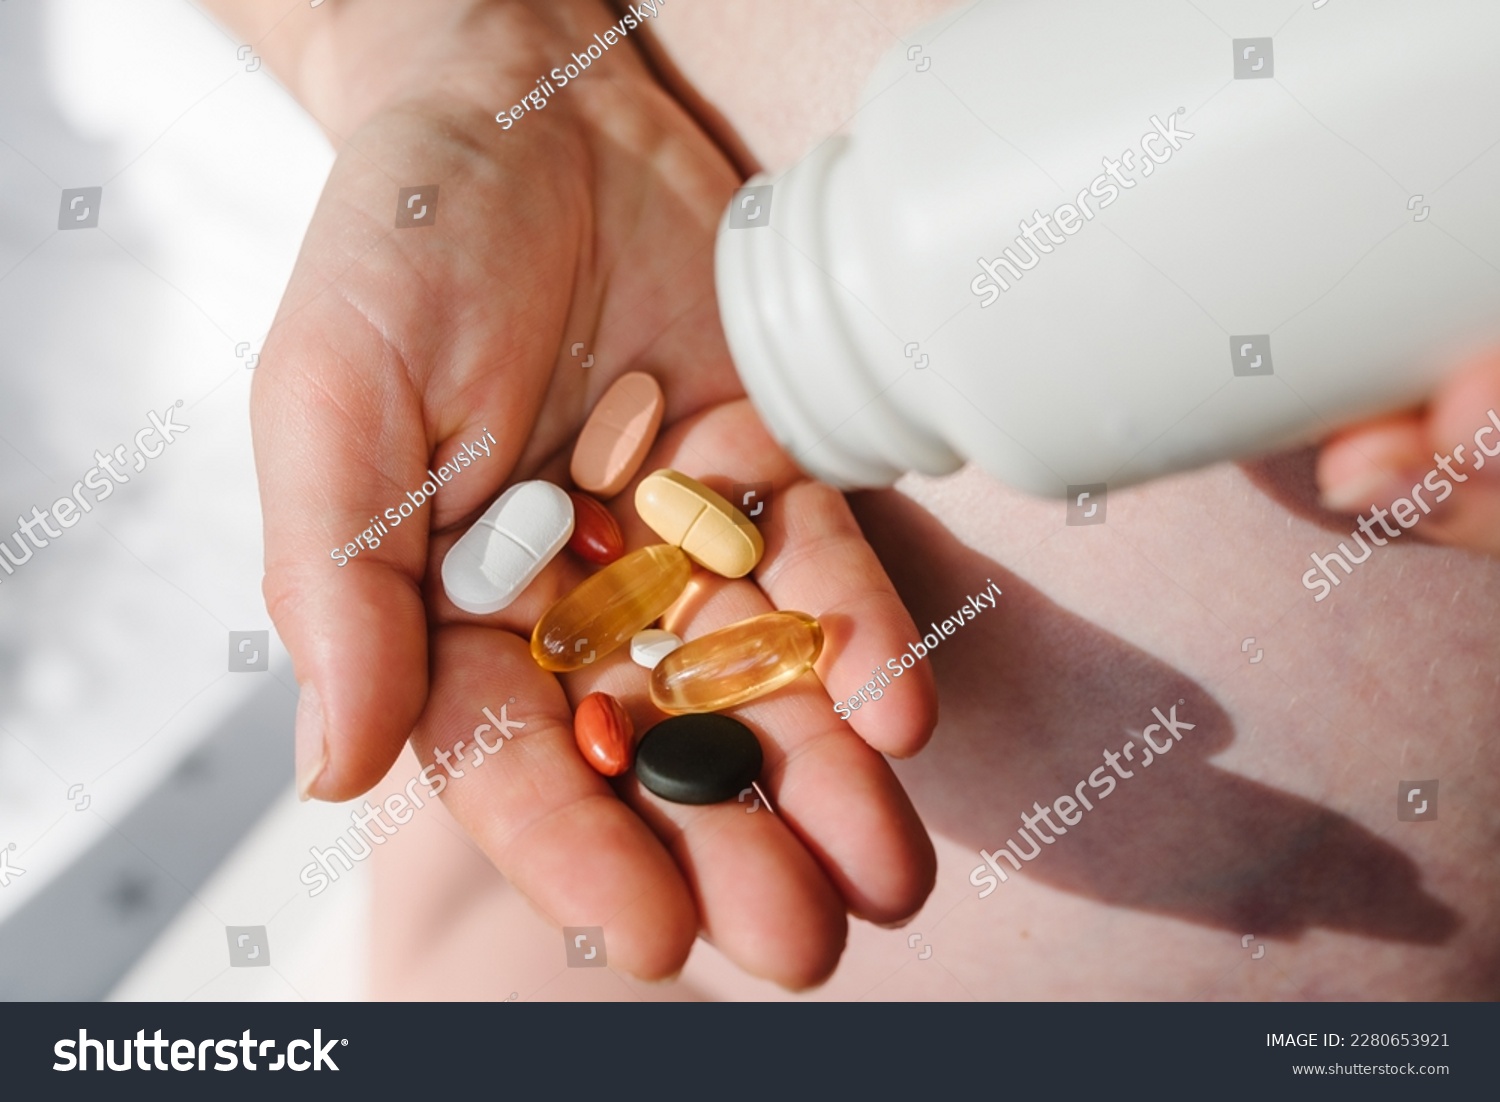 Closeup photo of supplements with a white bottle. Pregnant woman take omega 3, multivitamins, vitamins B, C, D, collagen tablets, probiotics, iron capsule. Girl hold vitamins daily. Top view. #2280653921